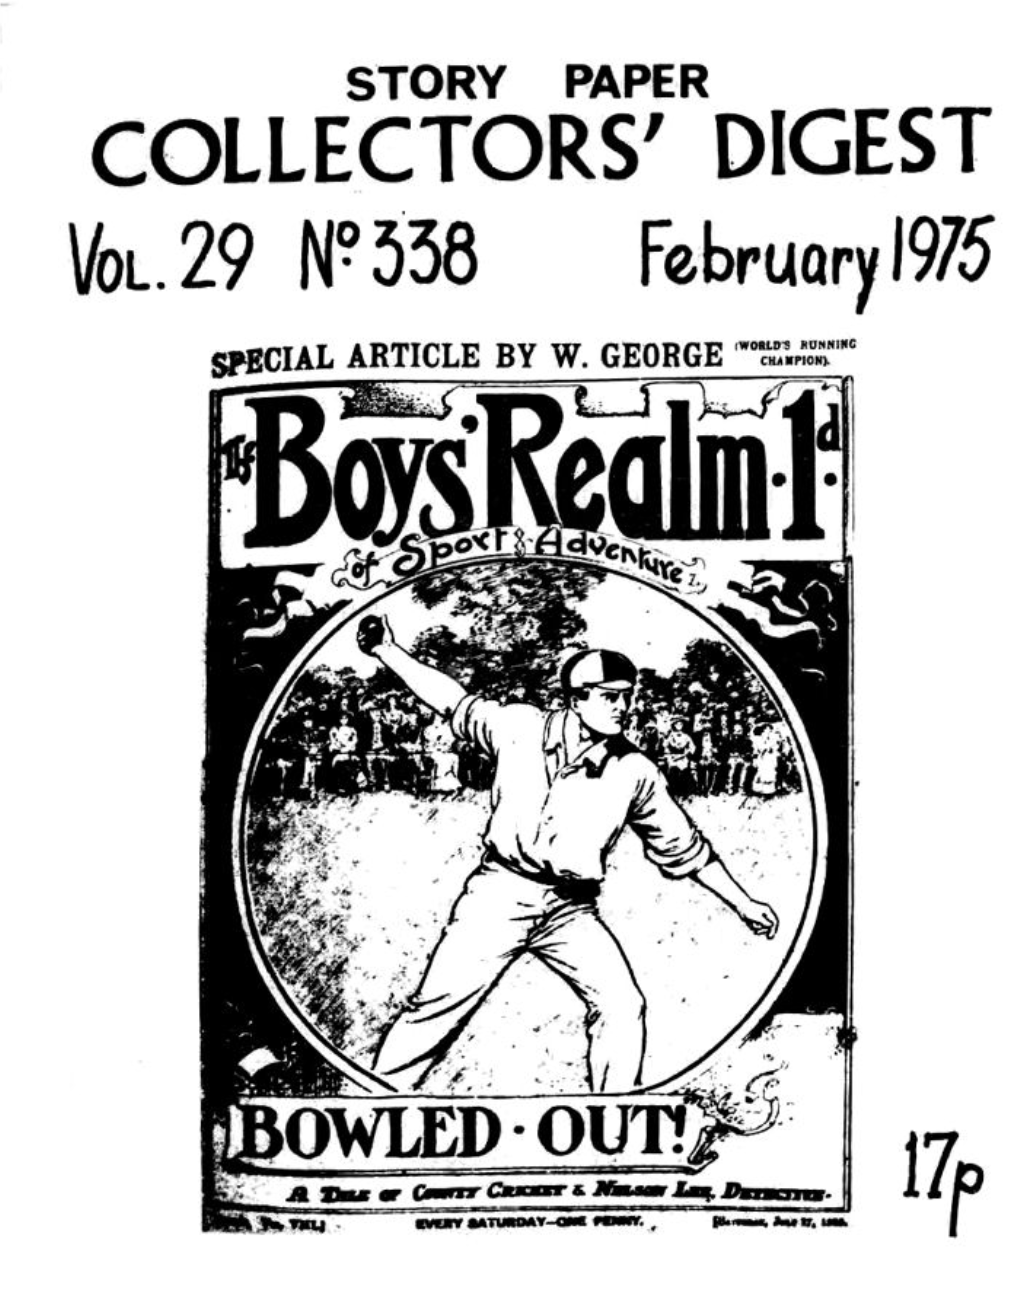 COLLECTORS' DIGEST Vol29 NC?338 February1915 Page 2